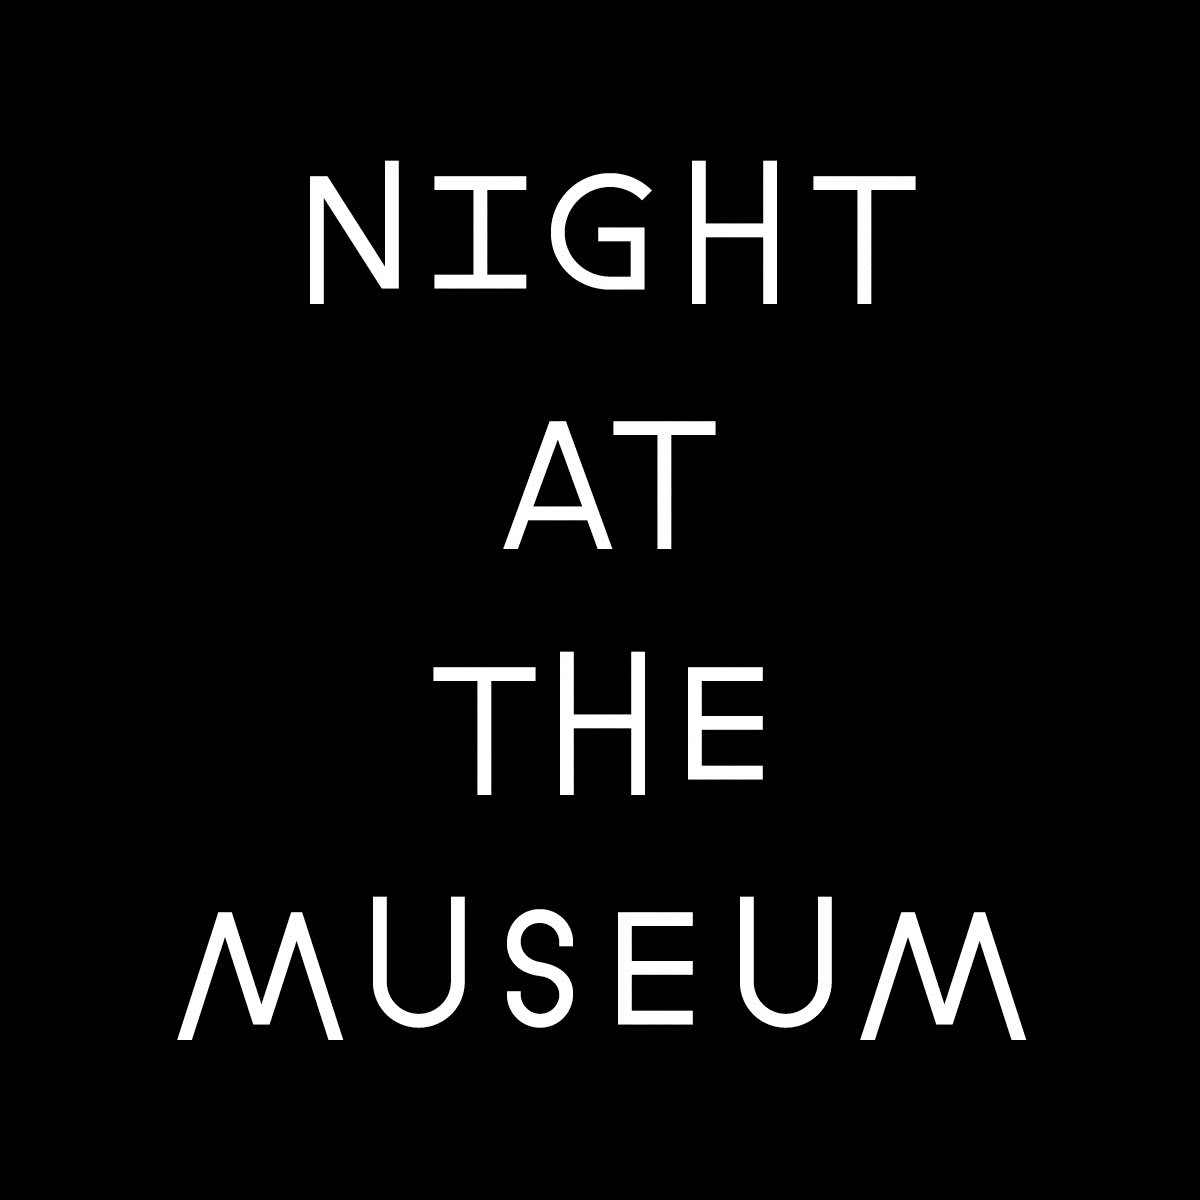 To celebrate Stravinsky’s “Rite of Spring”, NightAtTheMuseum will have performances by @TheDanceCartel and Bae Bro.